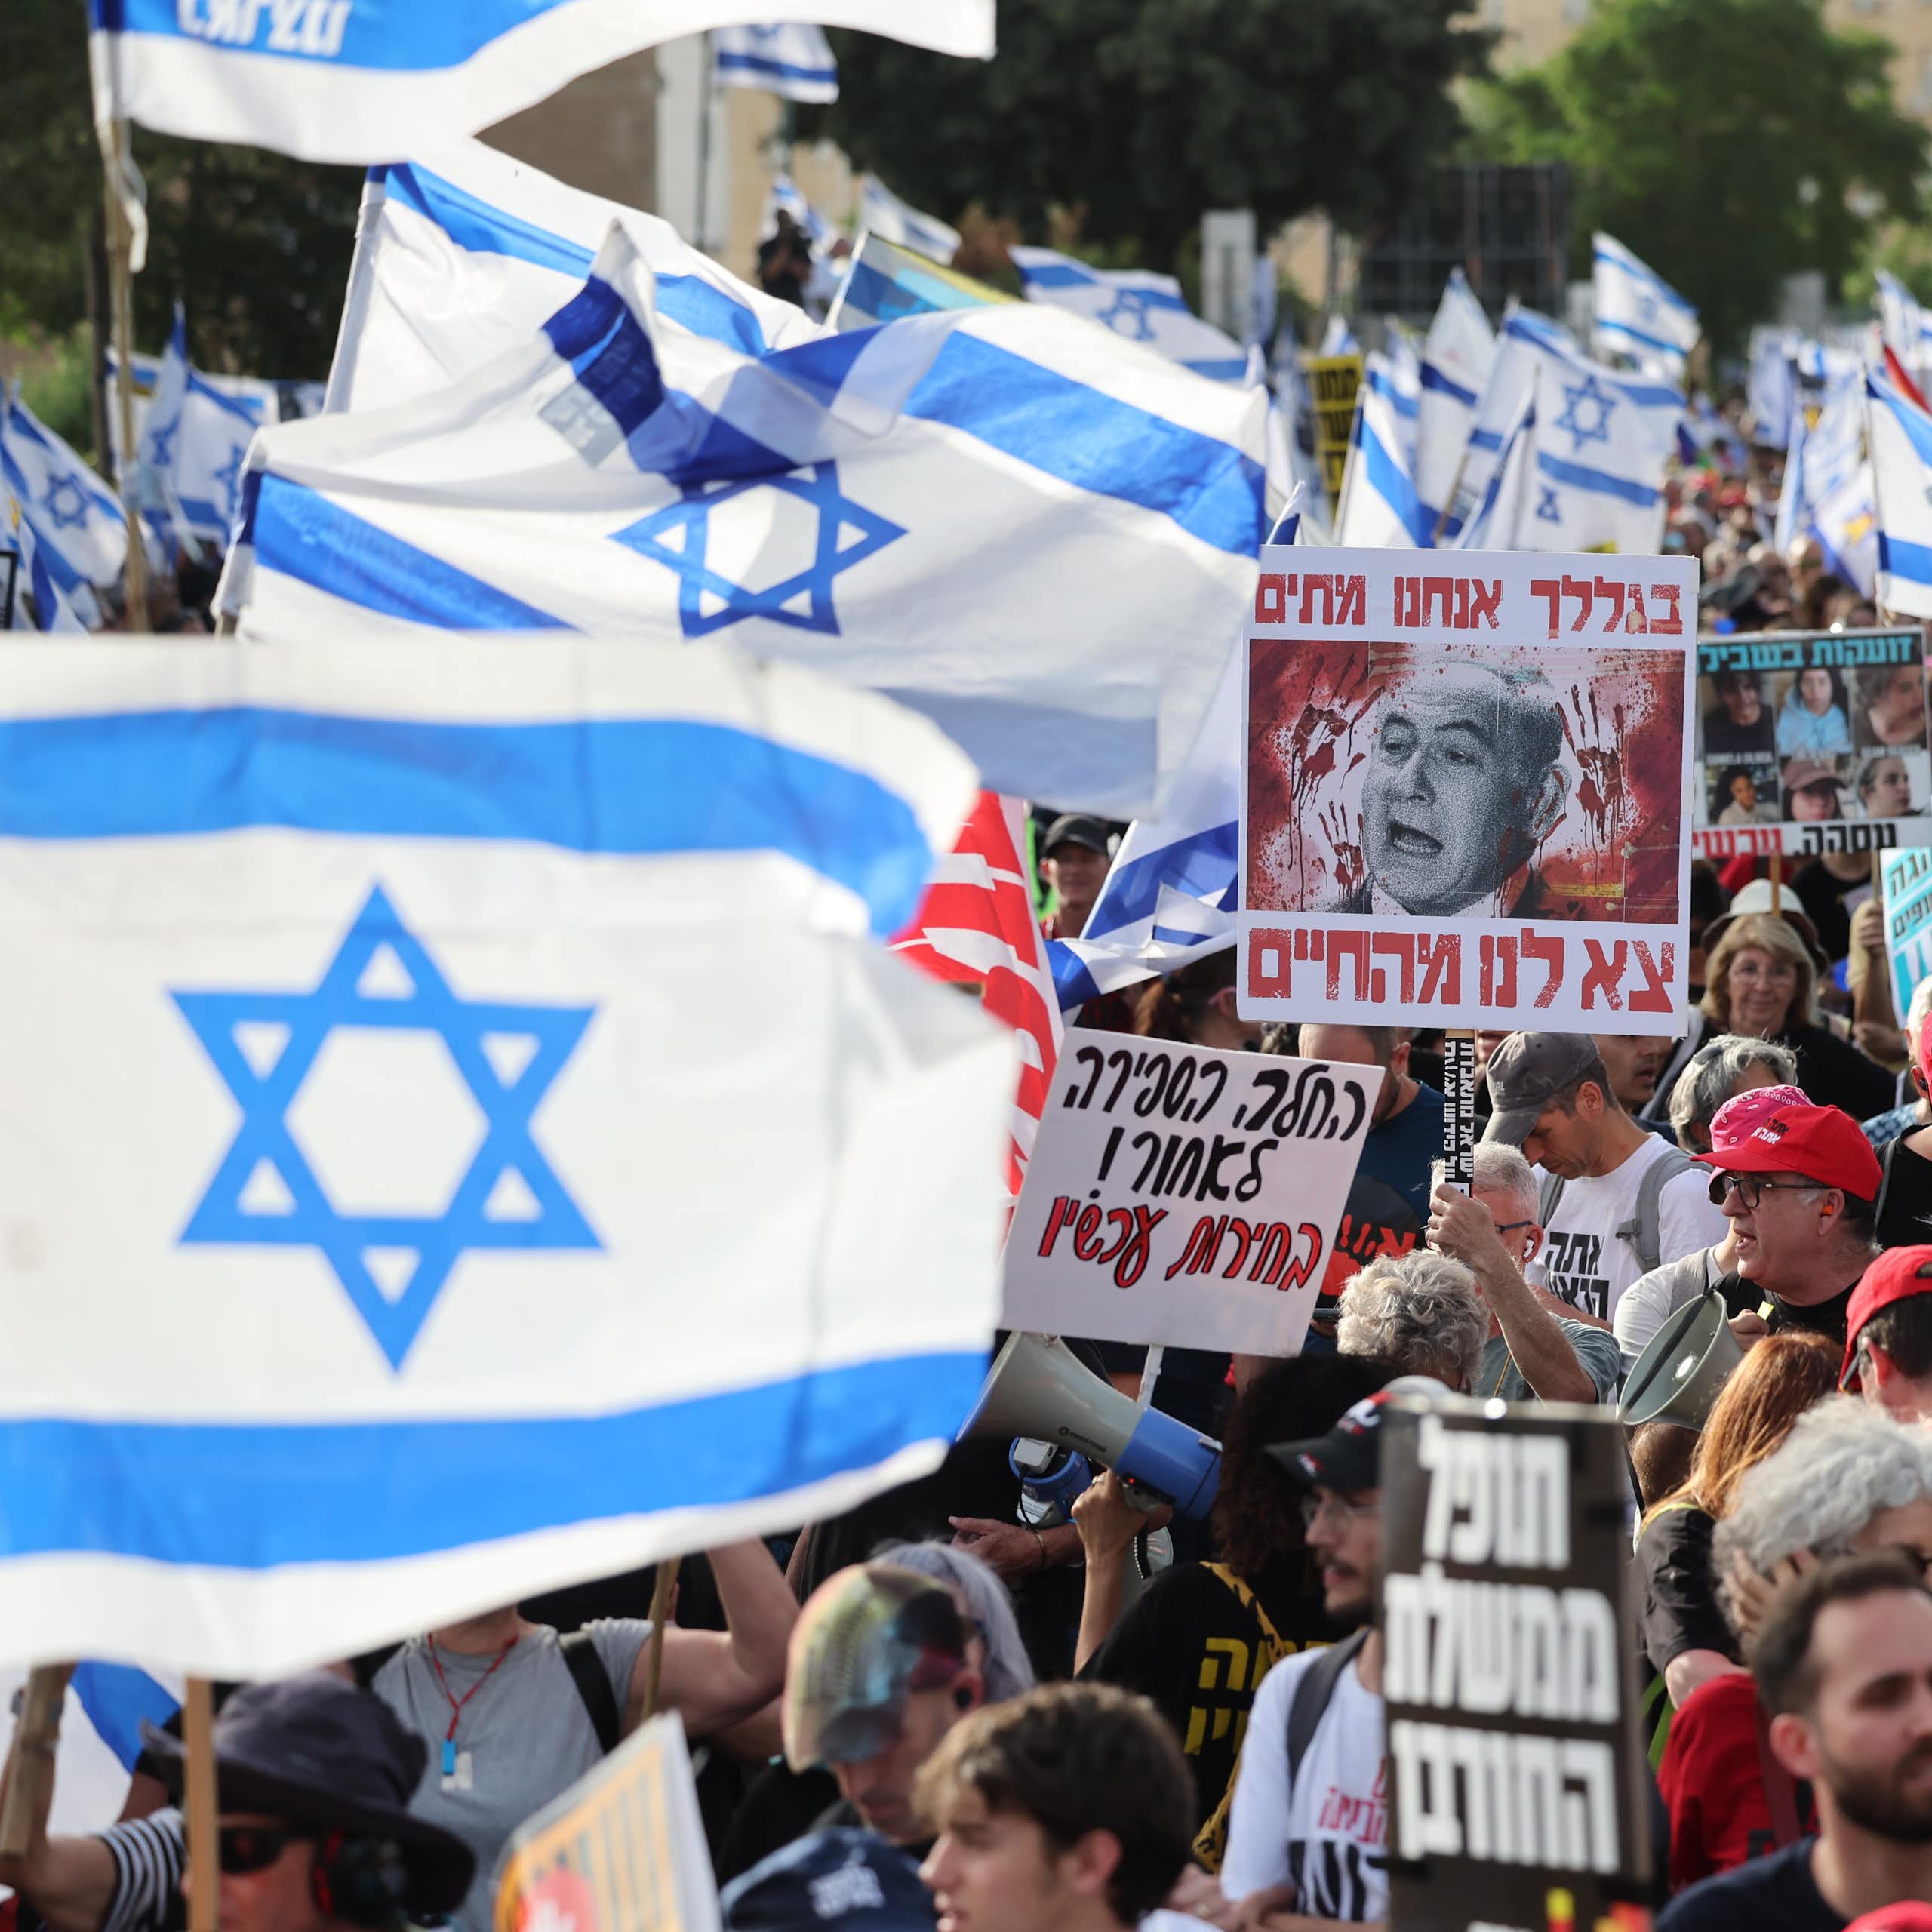 Israelis march with flags and banners with protests slogans in Hebrew.